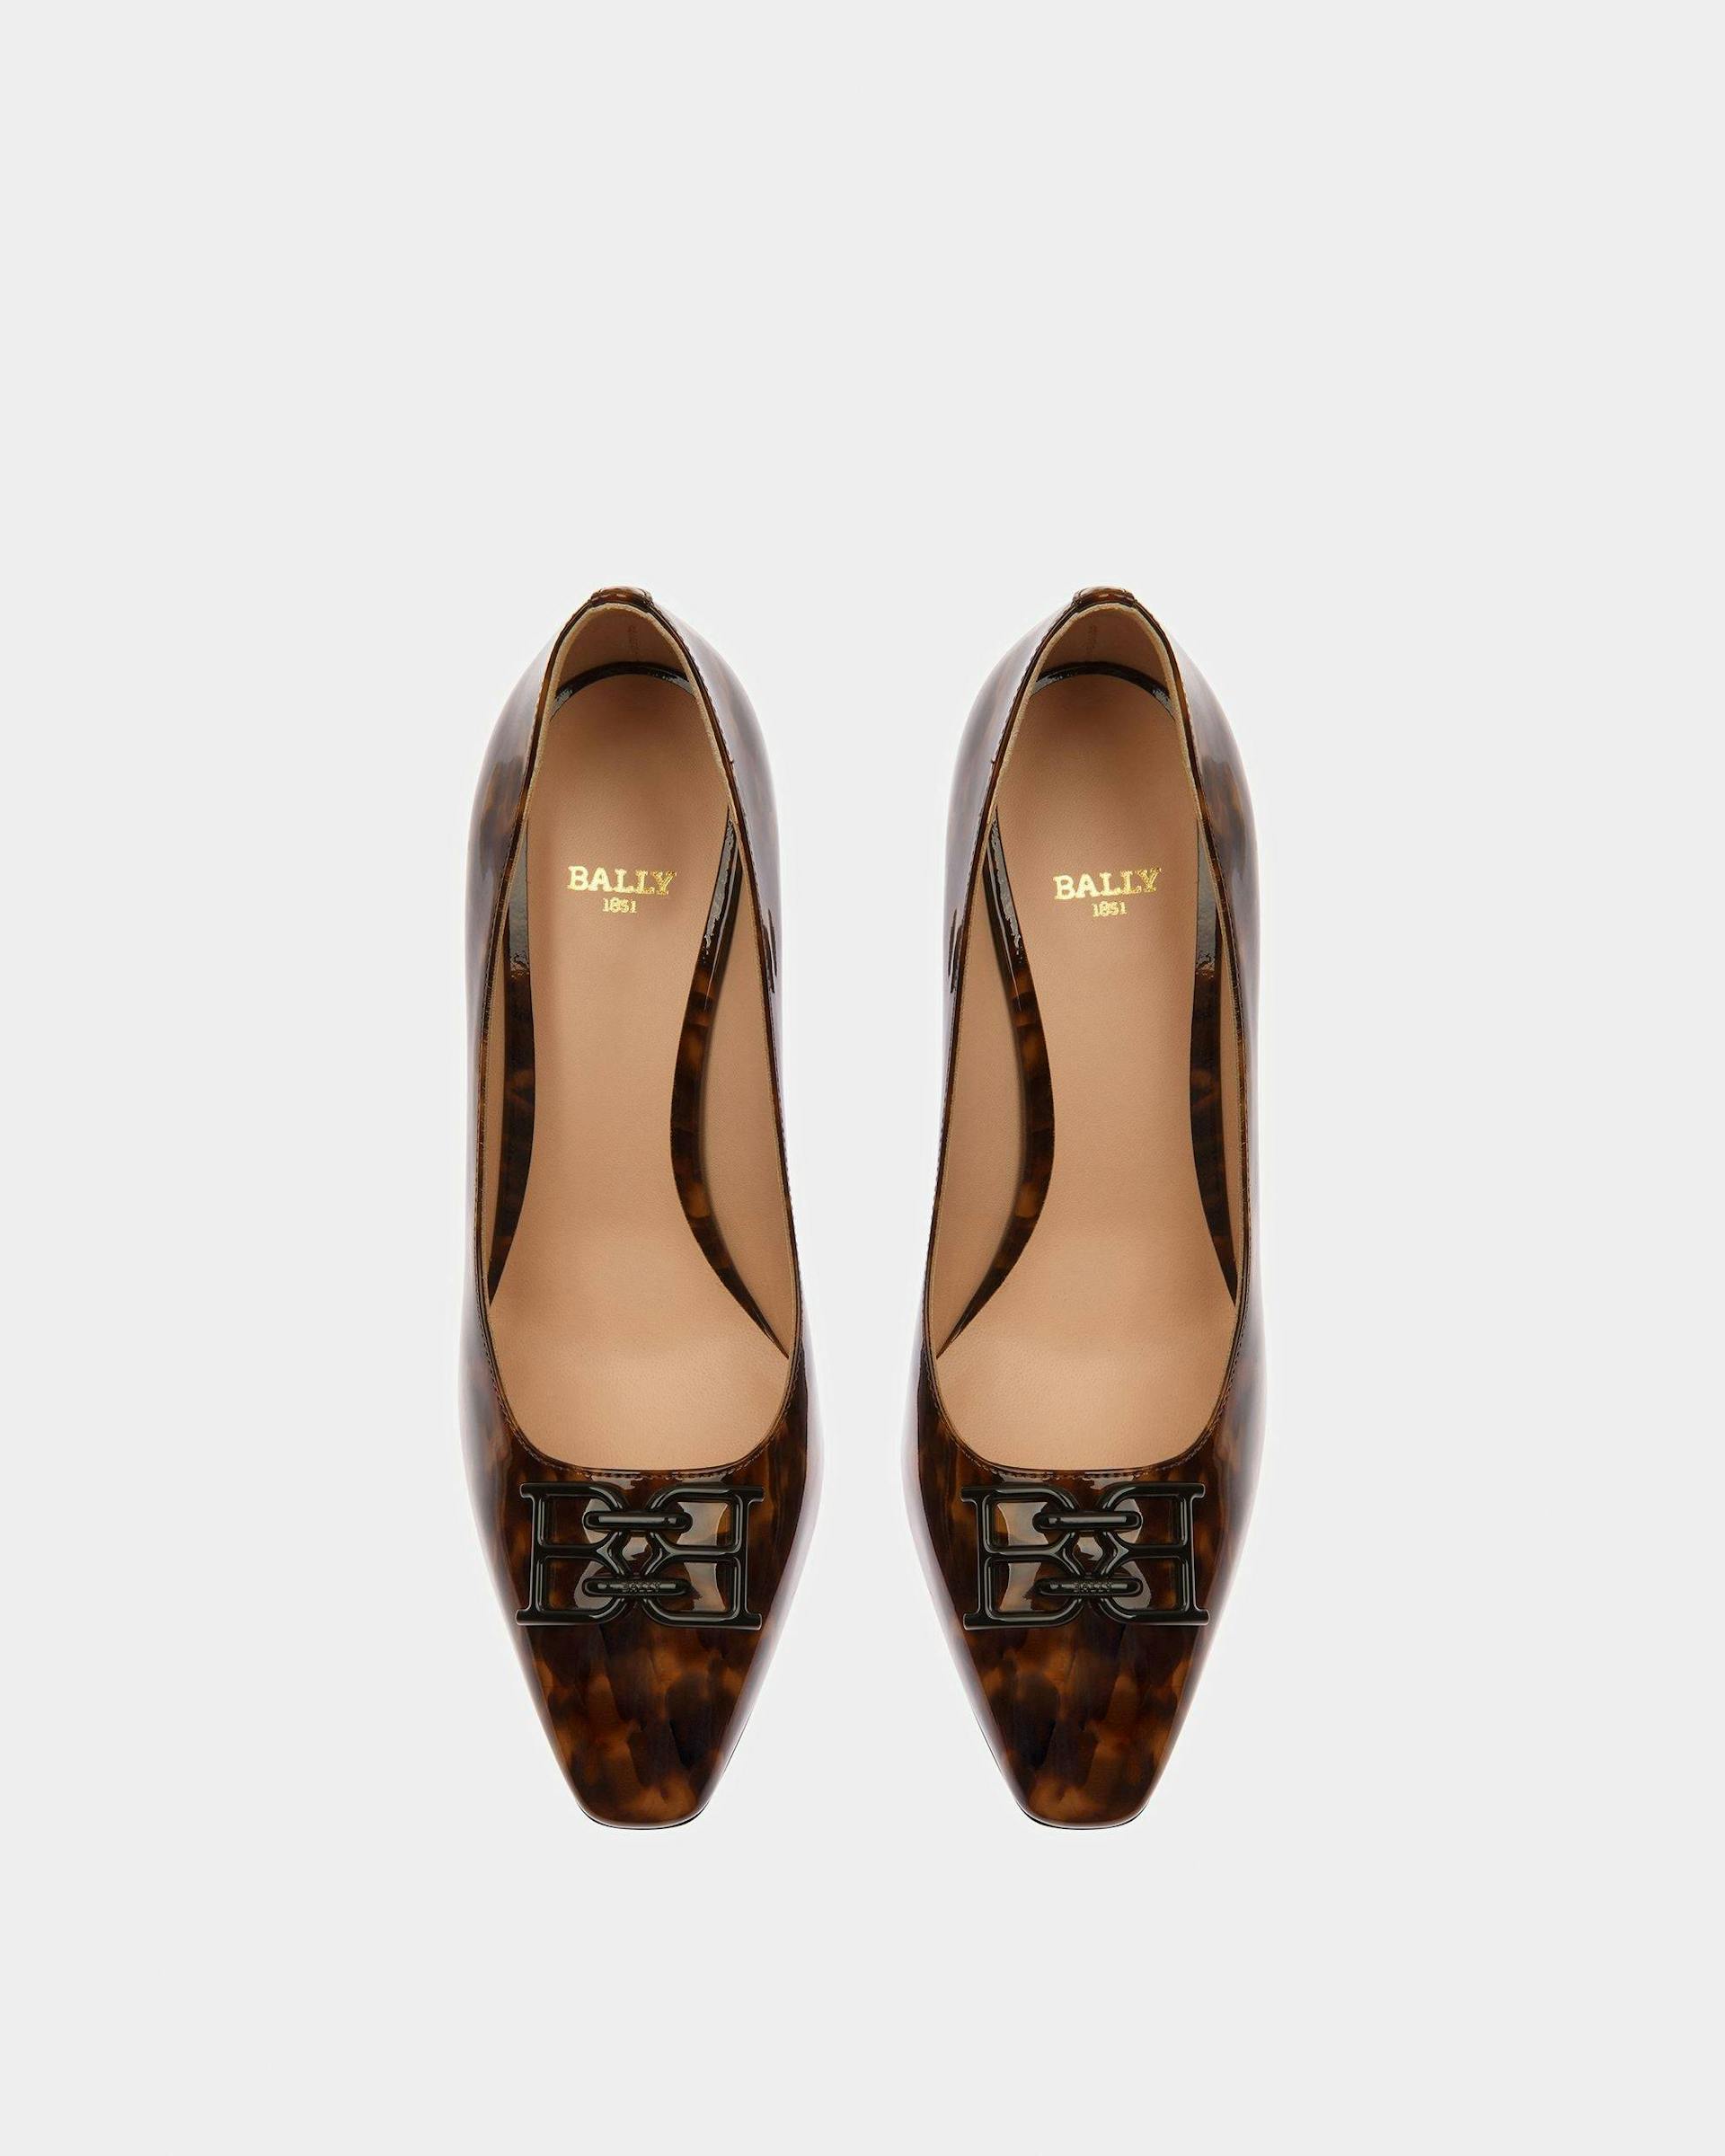 Evanca Leather Pumps In Black And Brown - Women's - Bally - 02